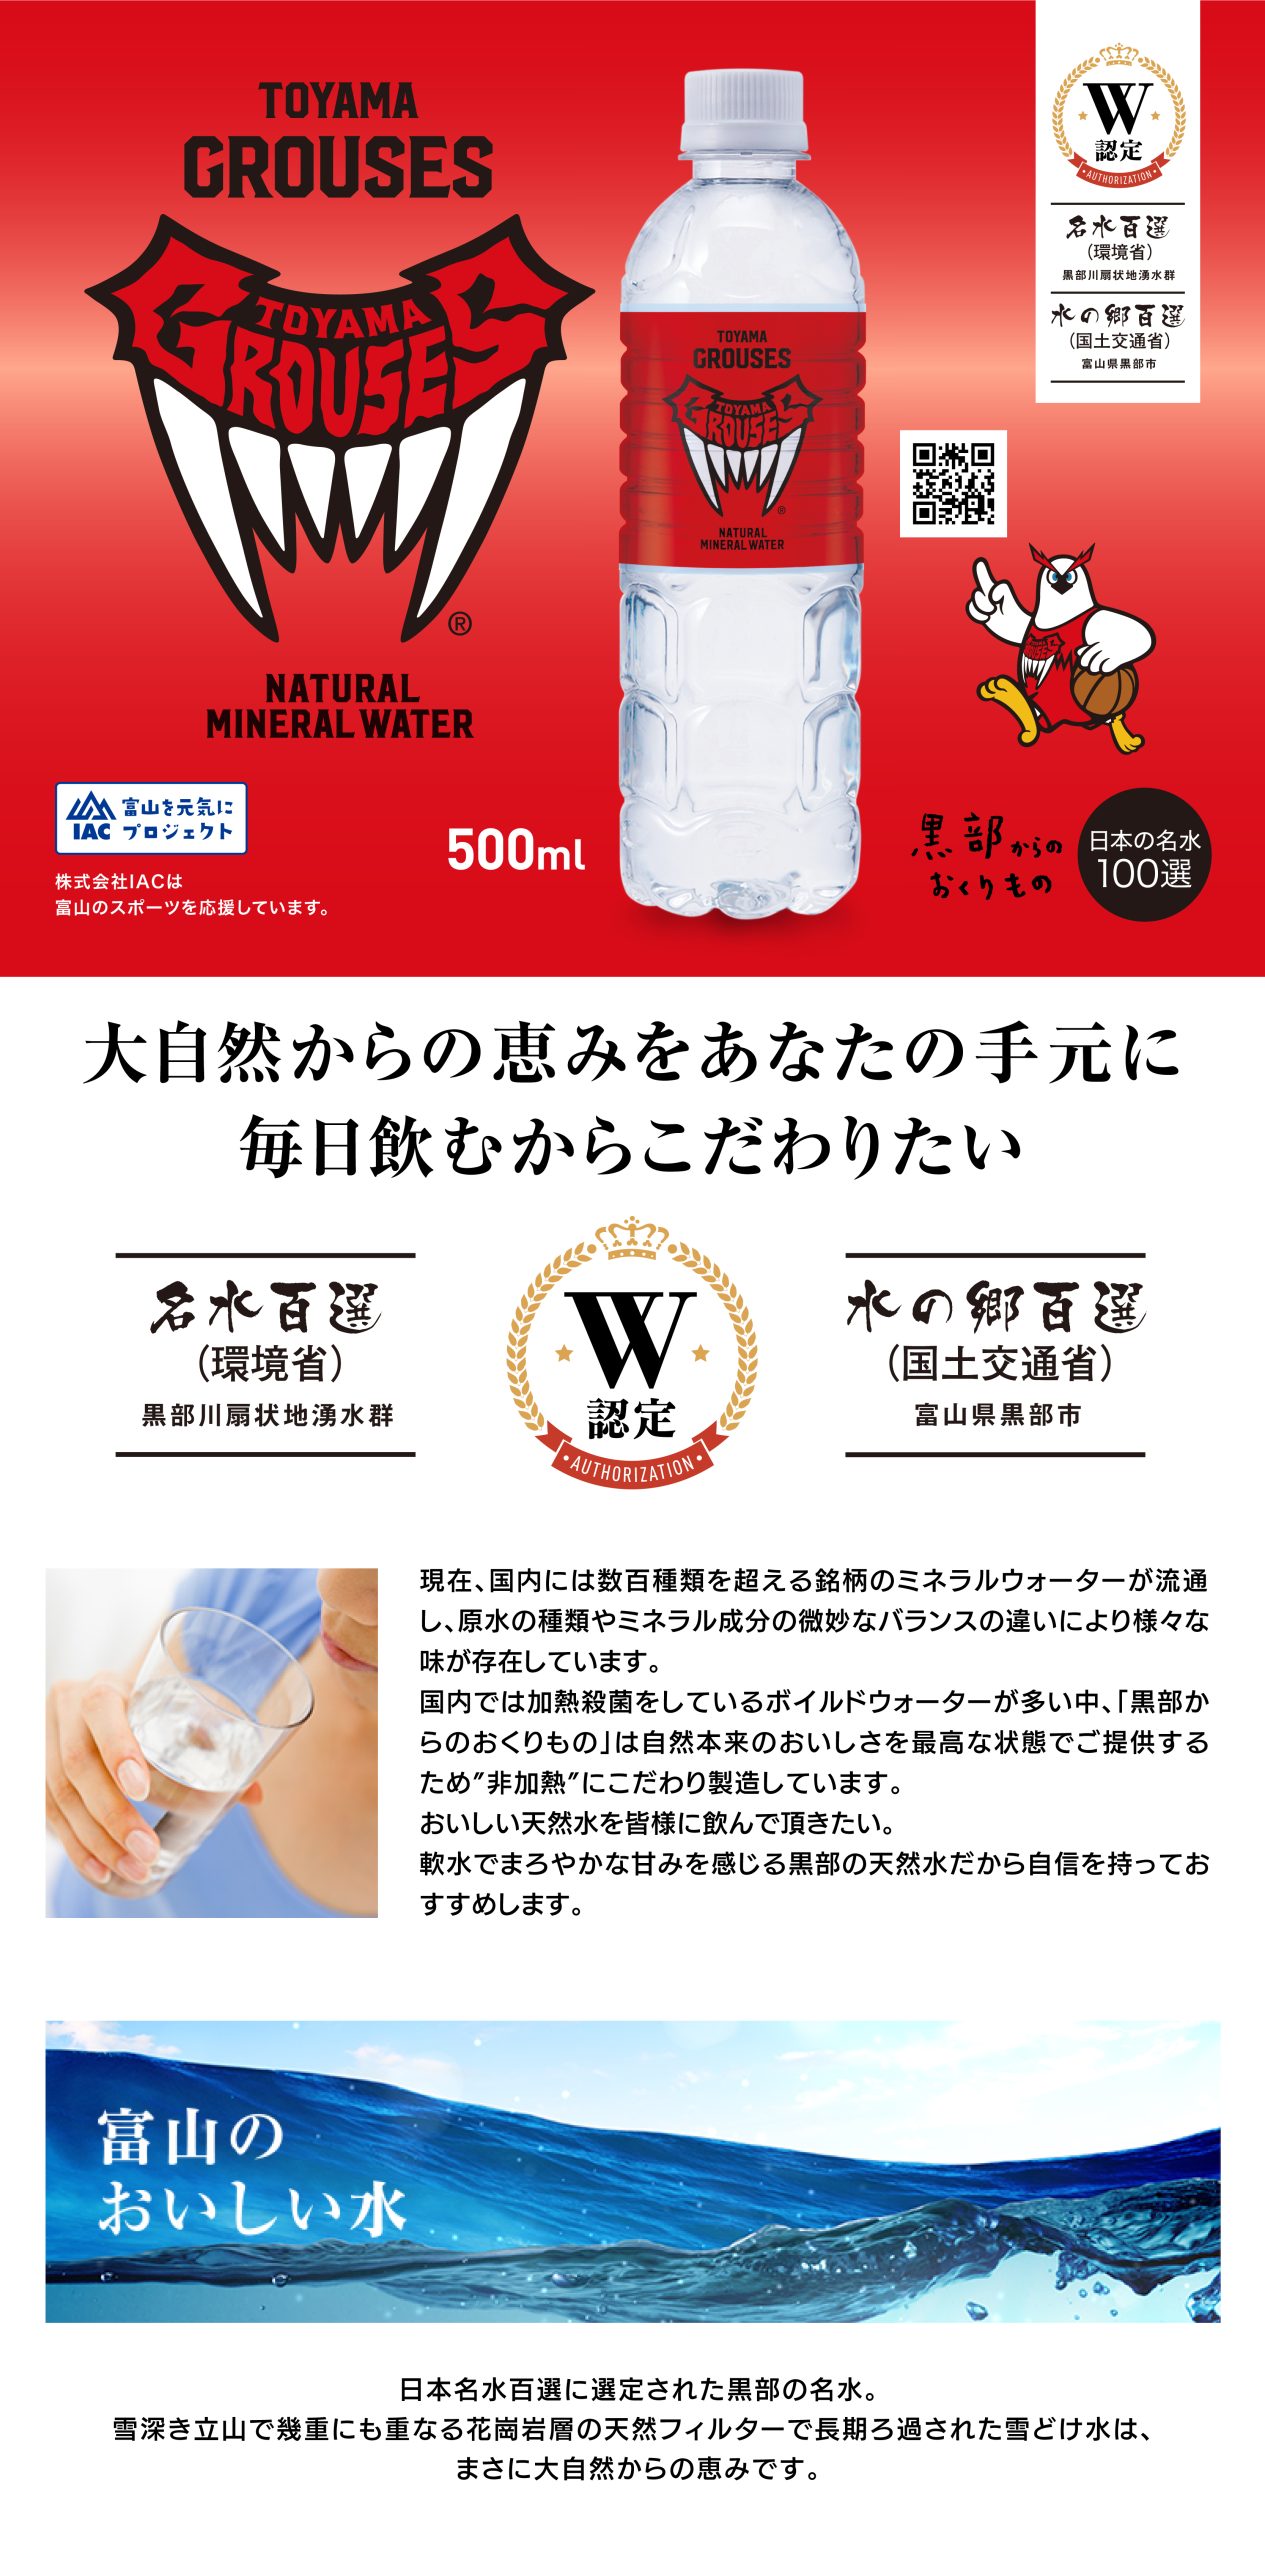 TOYAMA GROUSES NATURAL MINERAL WATER